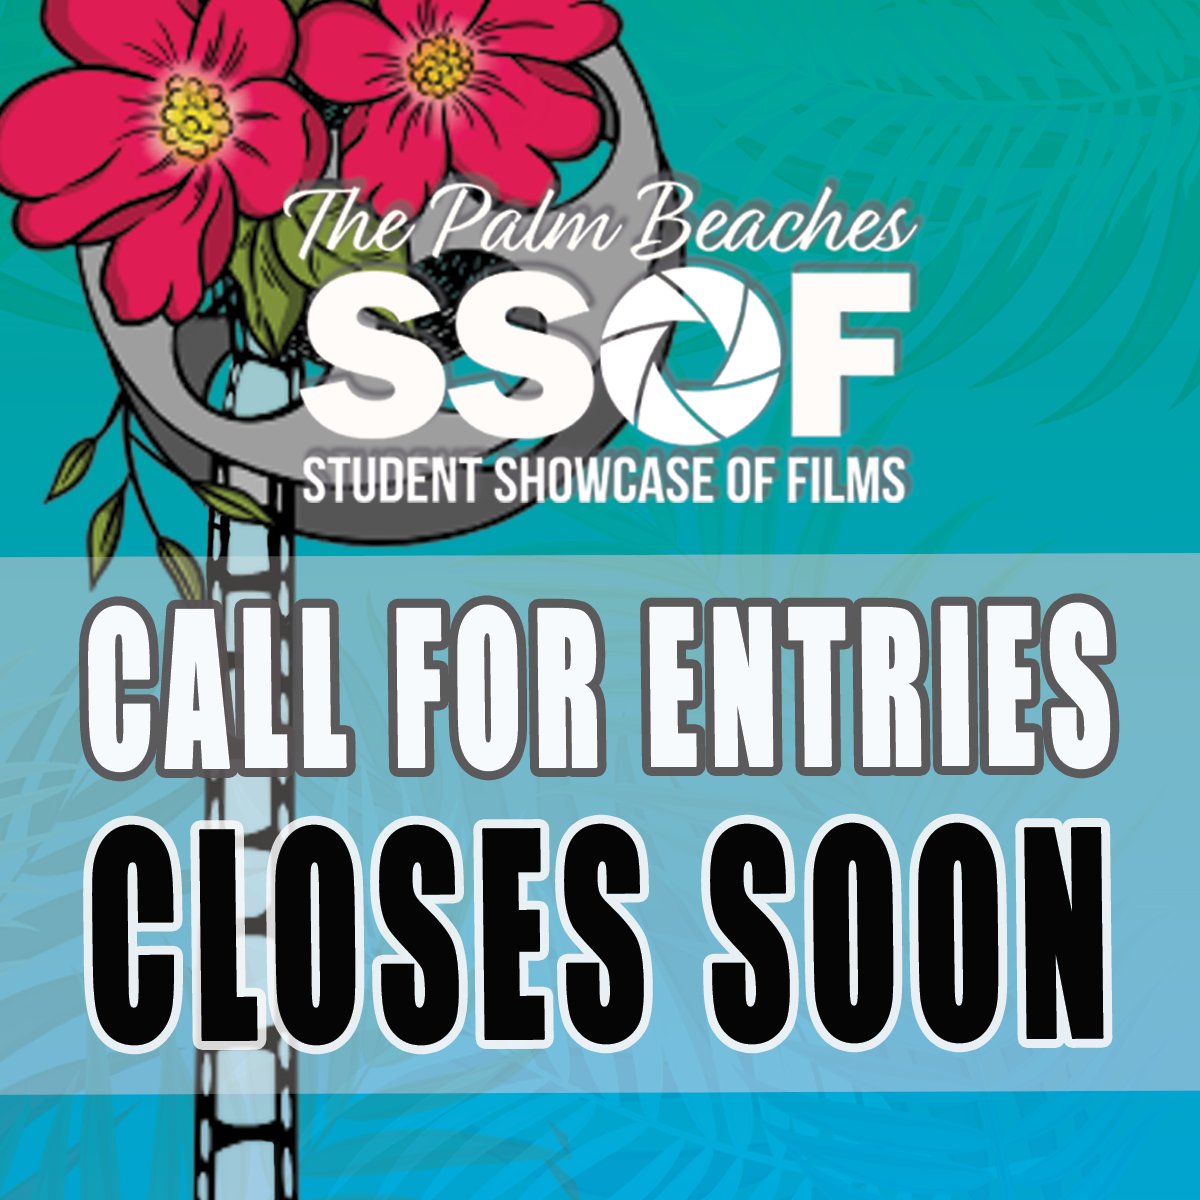 Deadline for submissions, Feb. 5, is approaching! Florida's largest student film competition and awards show returns April 26 with more than $28,000 in cash and prizes, and we're calling all creators to submit: pbfilm.com/ssof. @ringlingcollege @ucfcah @fsufilm #SSOF